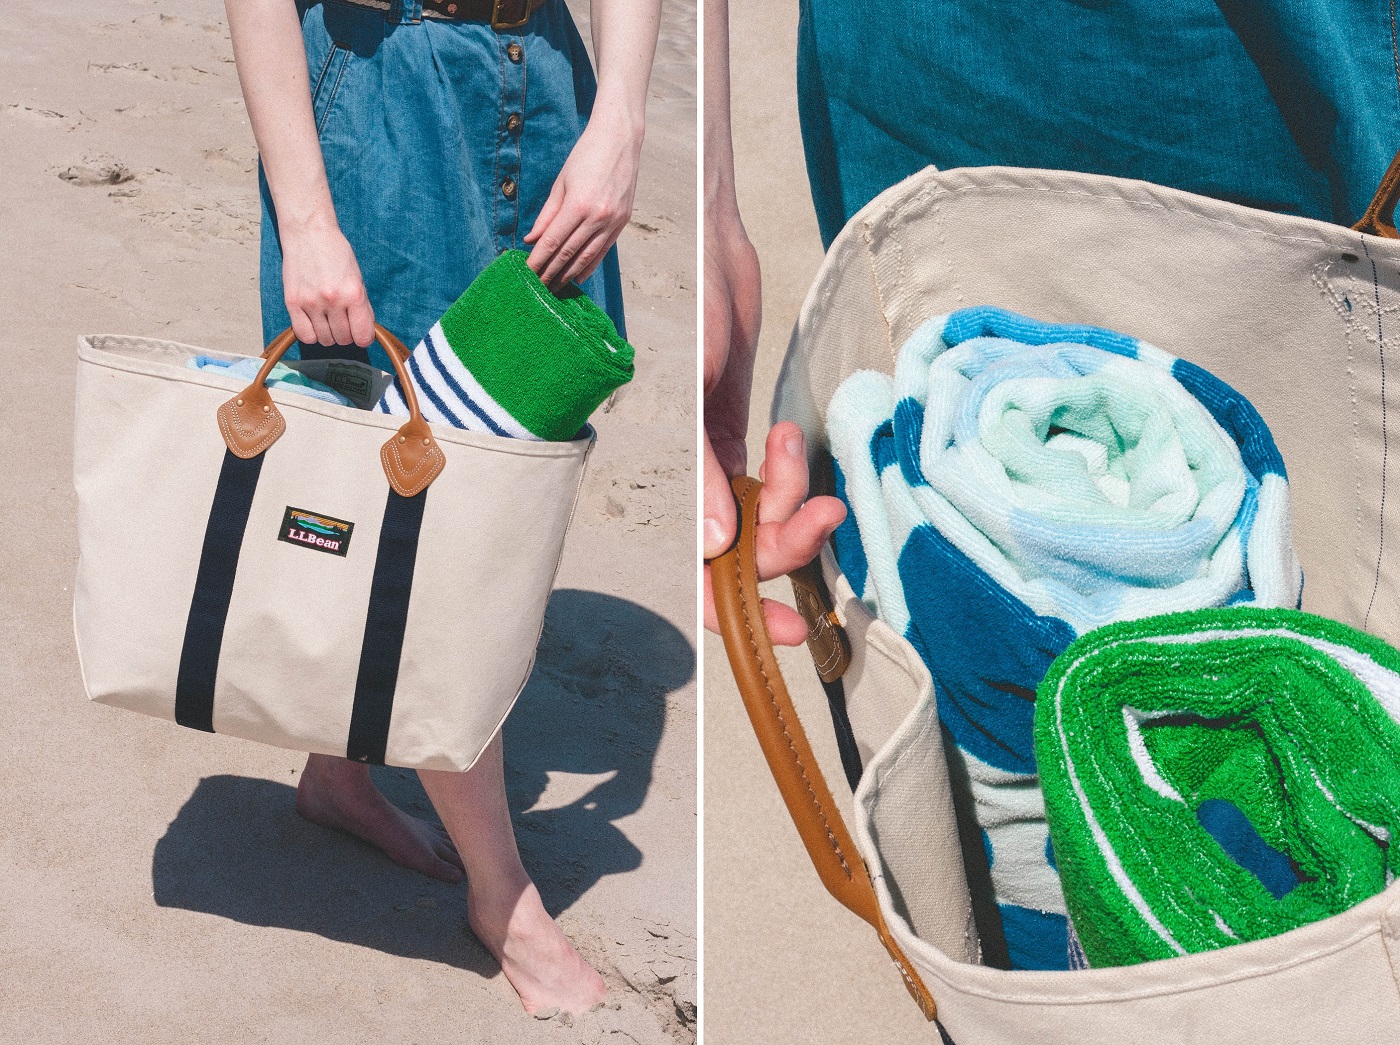 LLBean Boat Tote size comparison of the XL, L and M sizes #ironicboatt, boat and tote bag